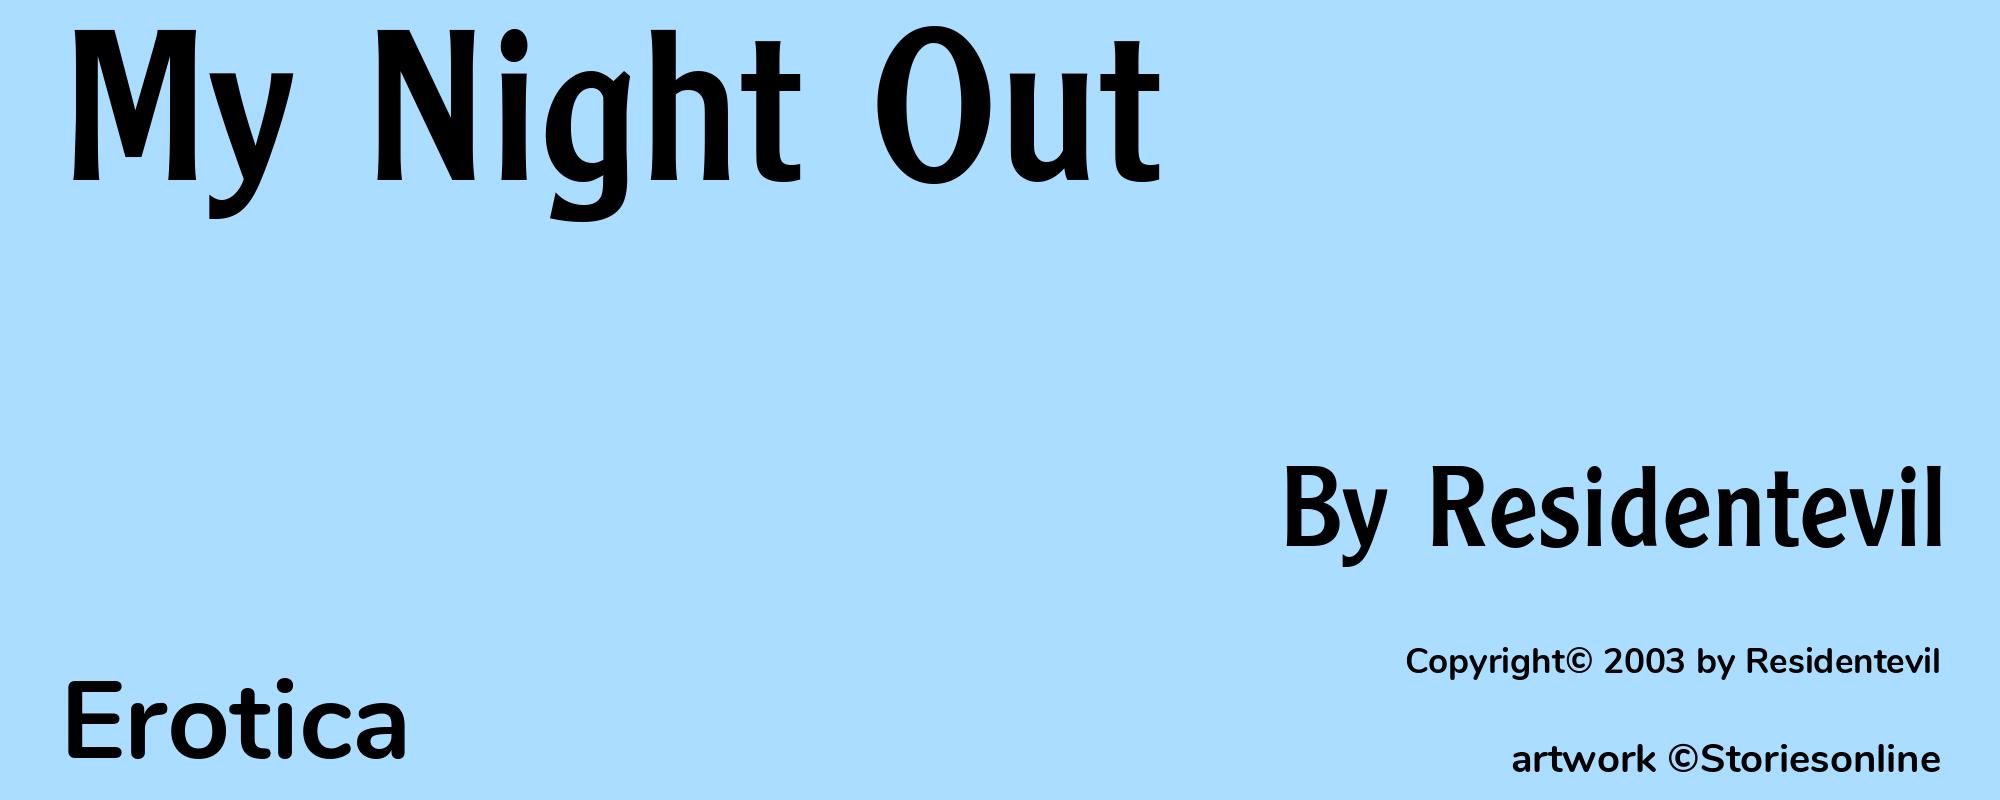 My Night Out - Cover